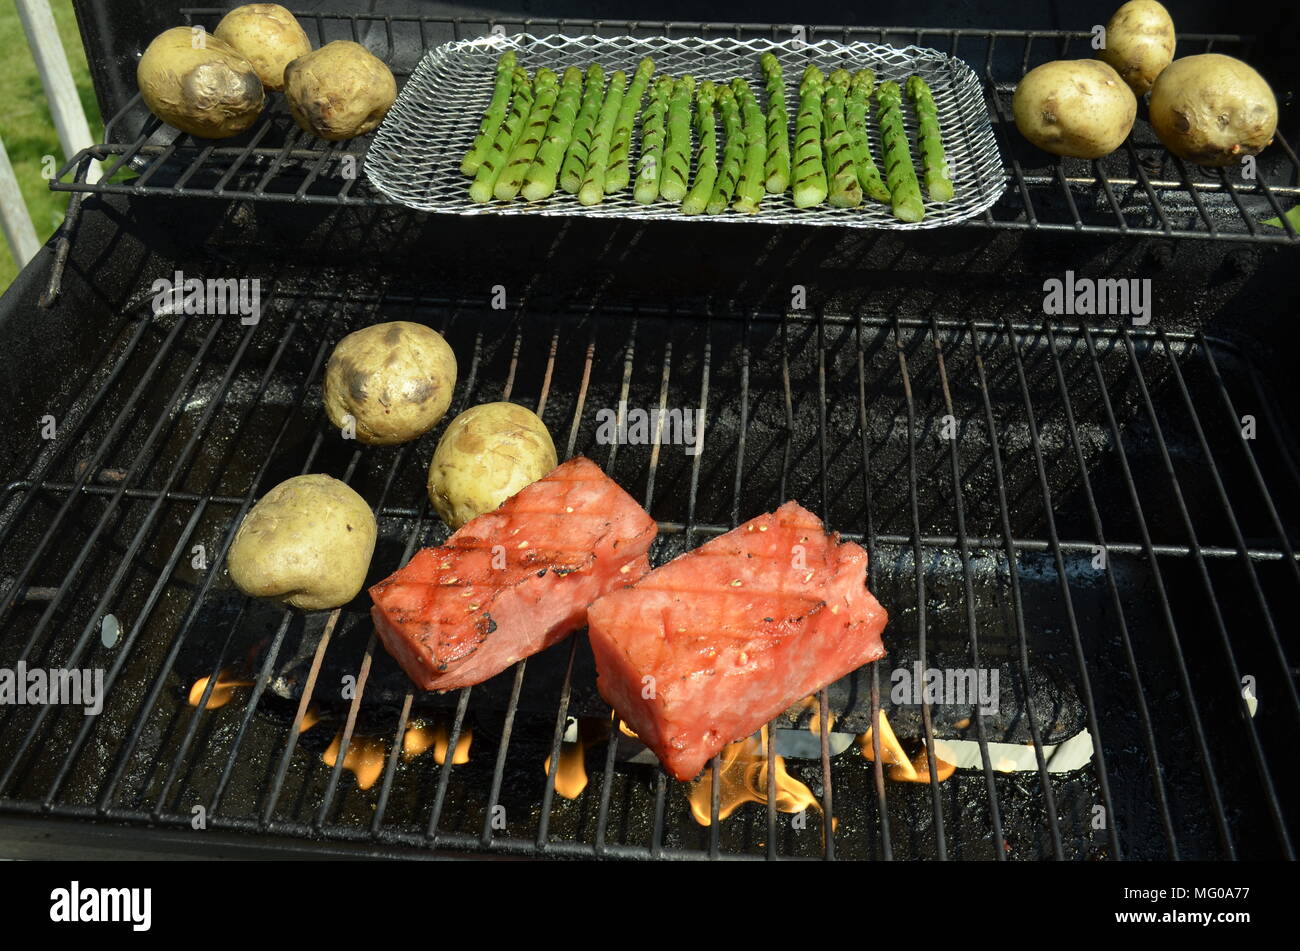 Watermelon, potatoes, and asparagus cooking on the outdoor backyard BBQ grill on a summer Sunday afternoon. Stock Photo